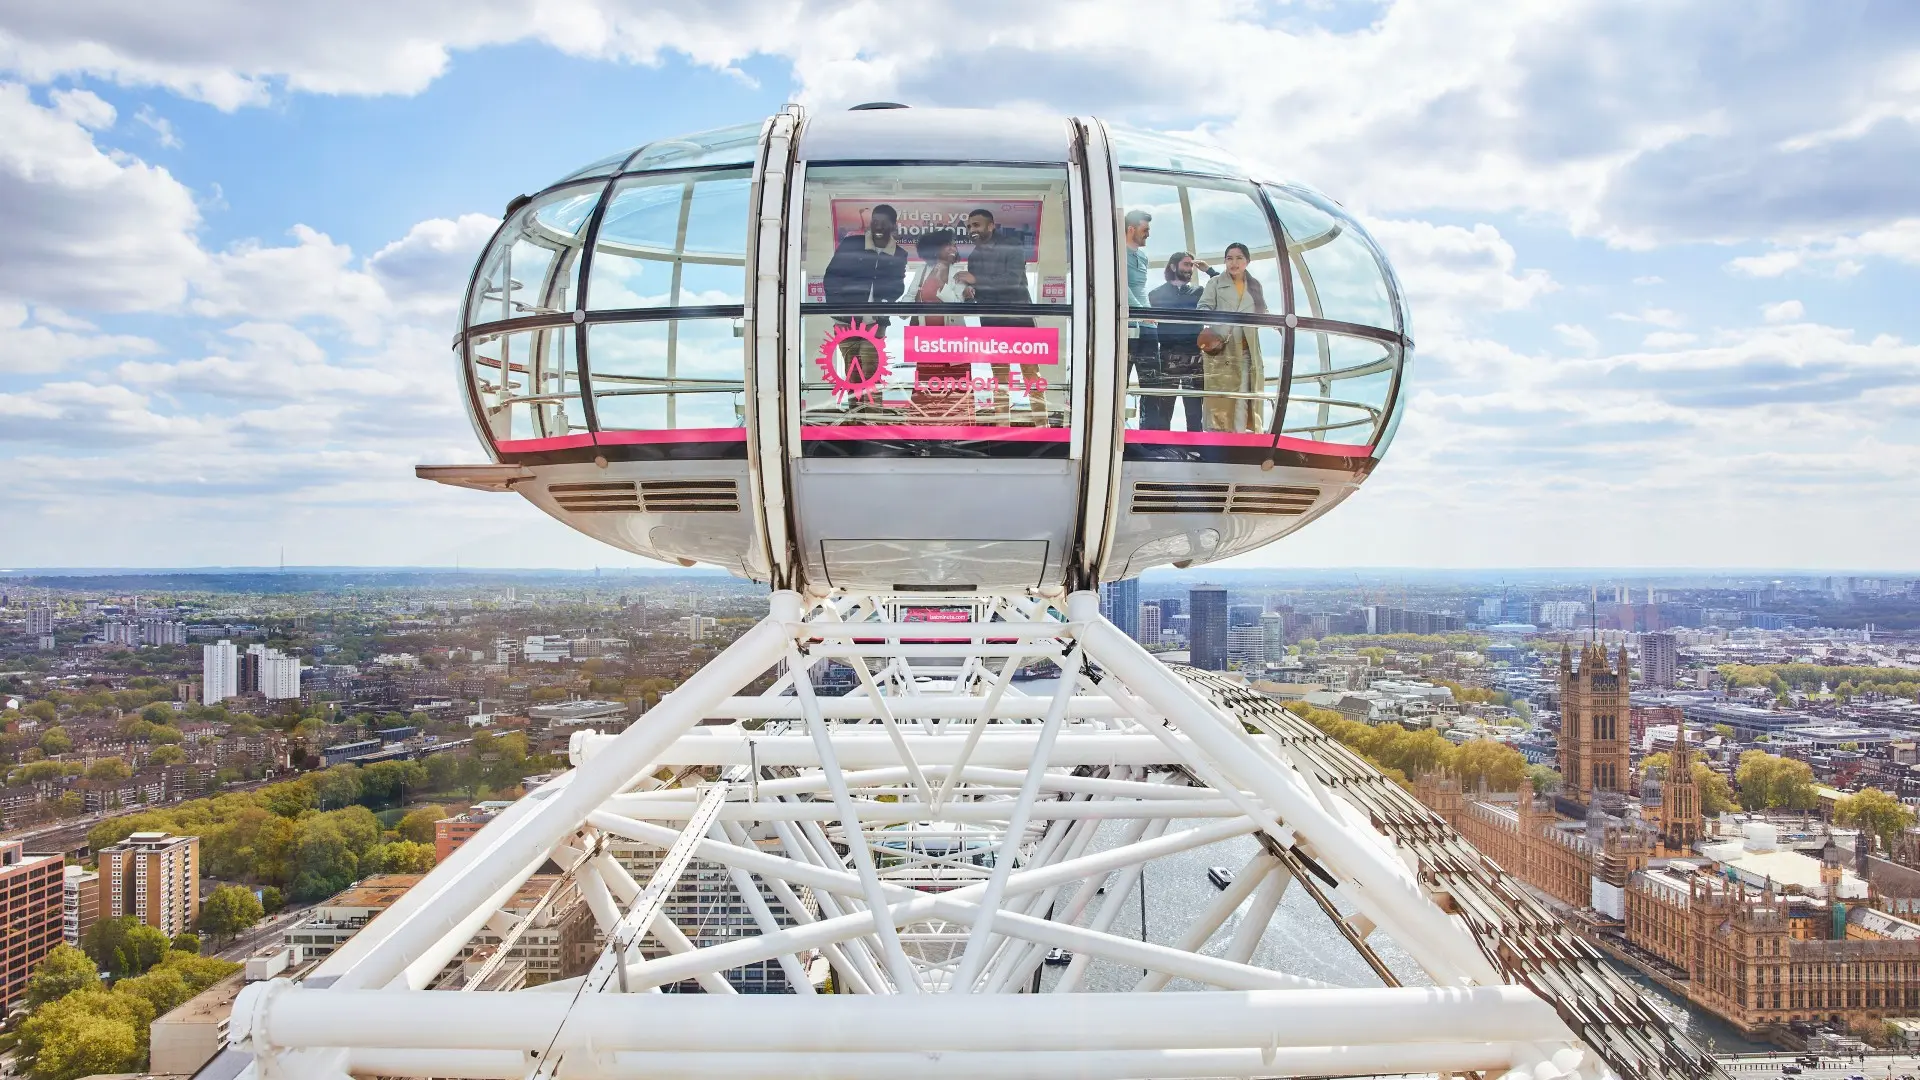 the london eye ride is one of the best things to do in London